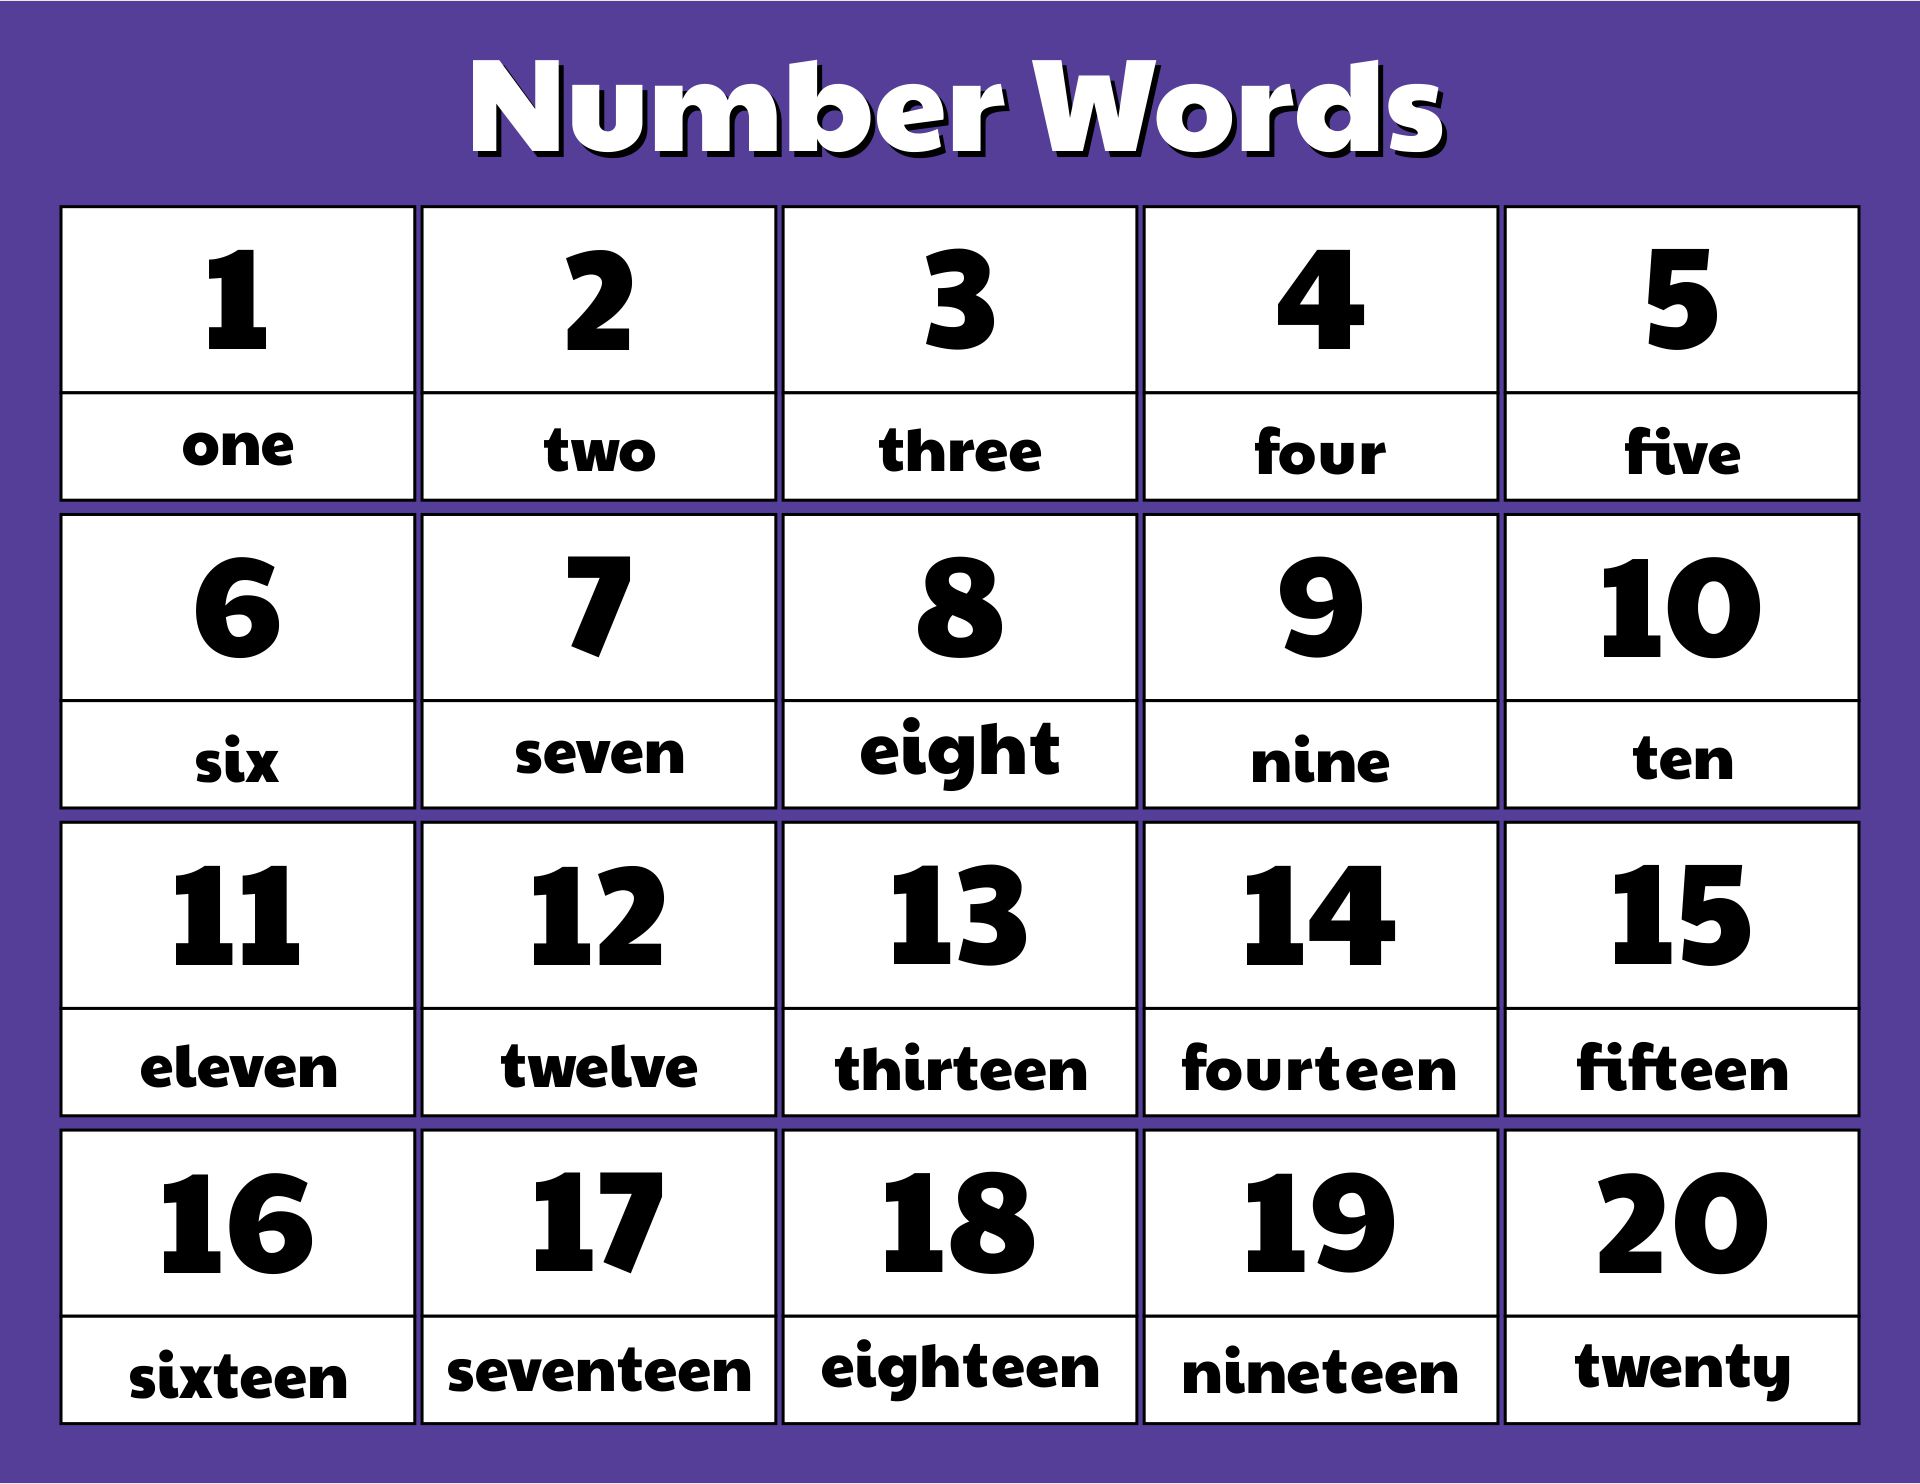 5-best-images-of-printable-number-searches-1-100-number-chart-1-100